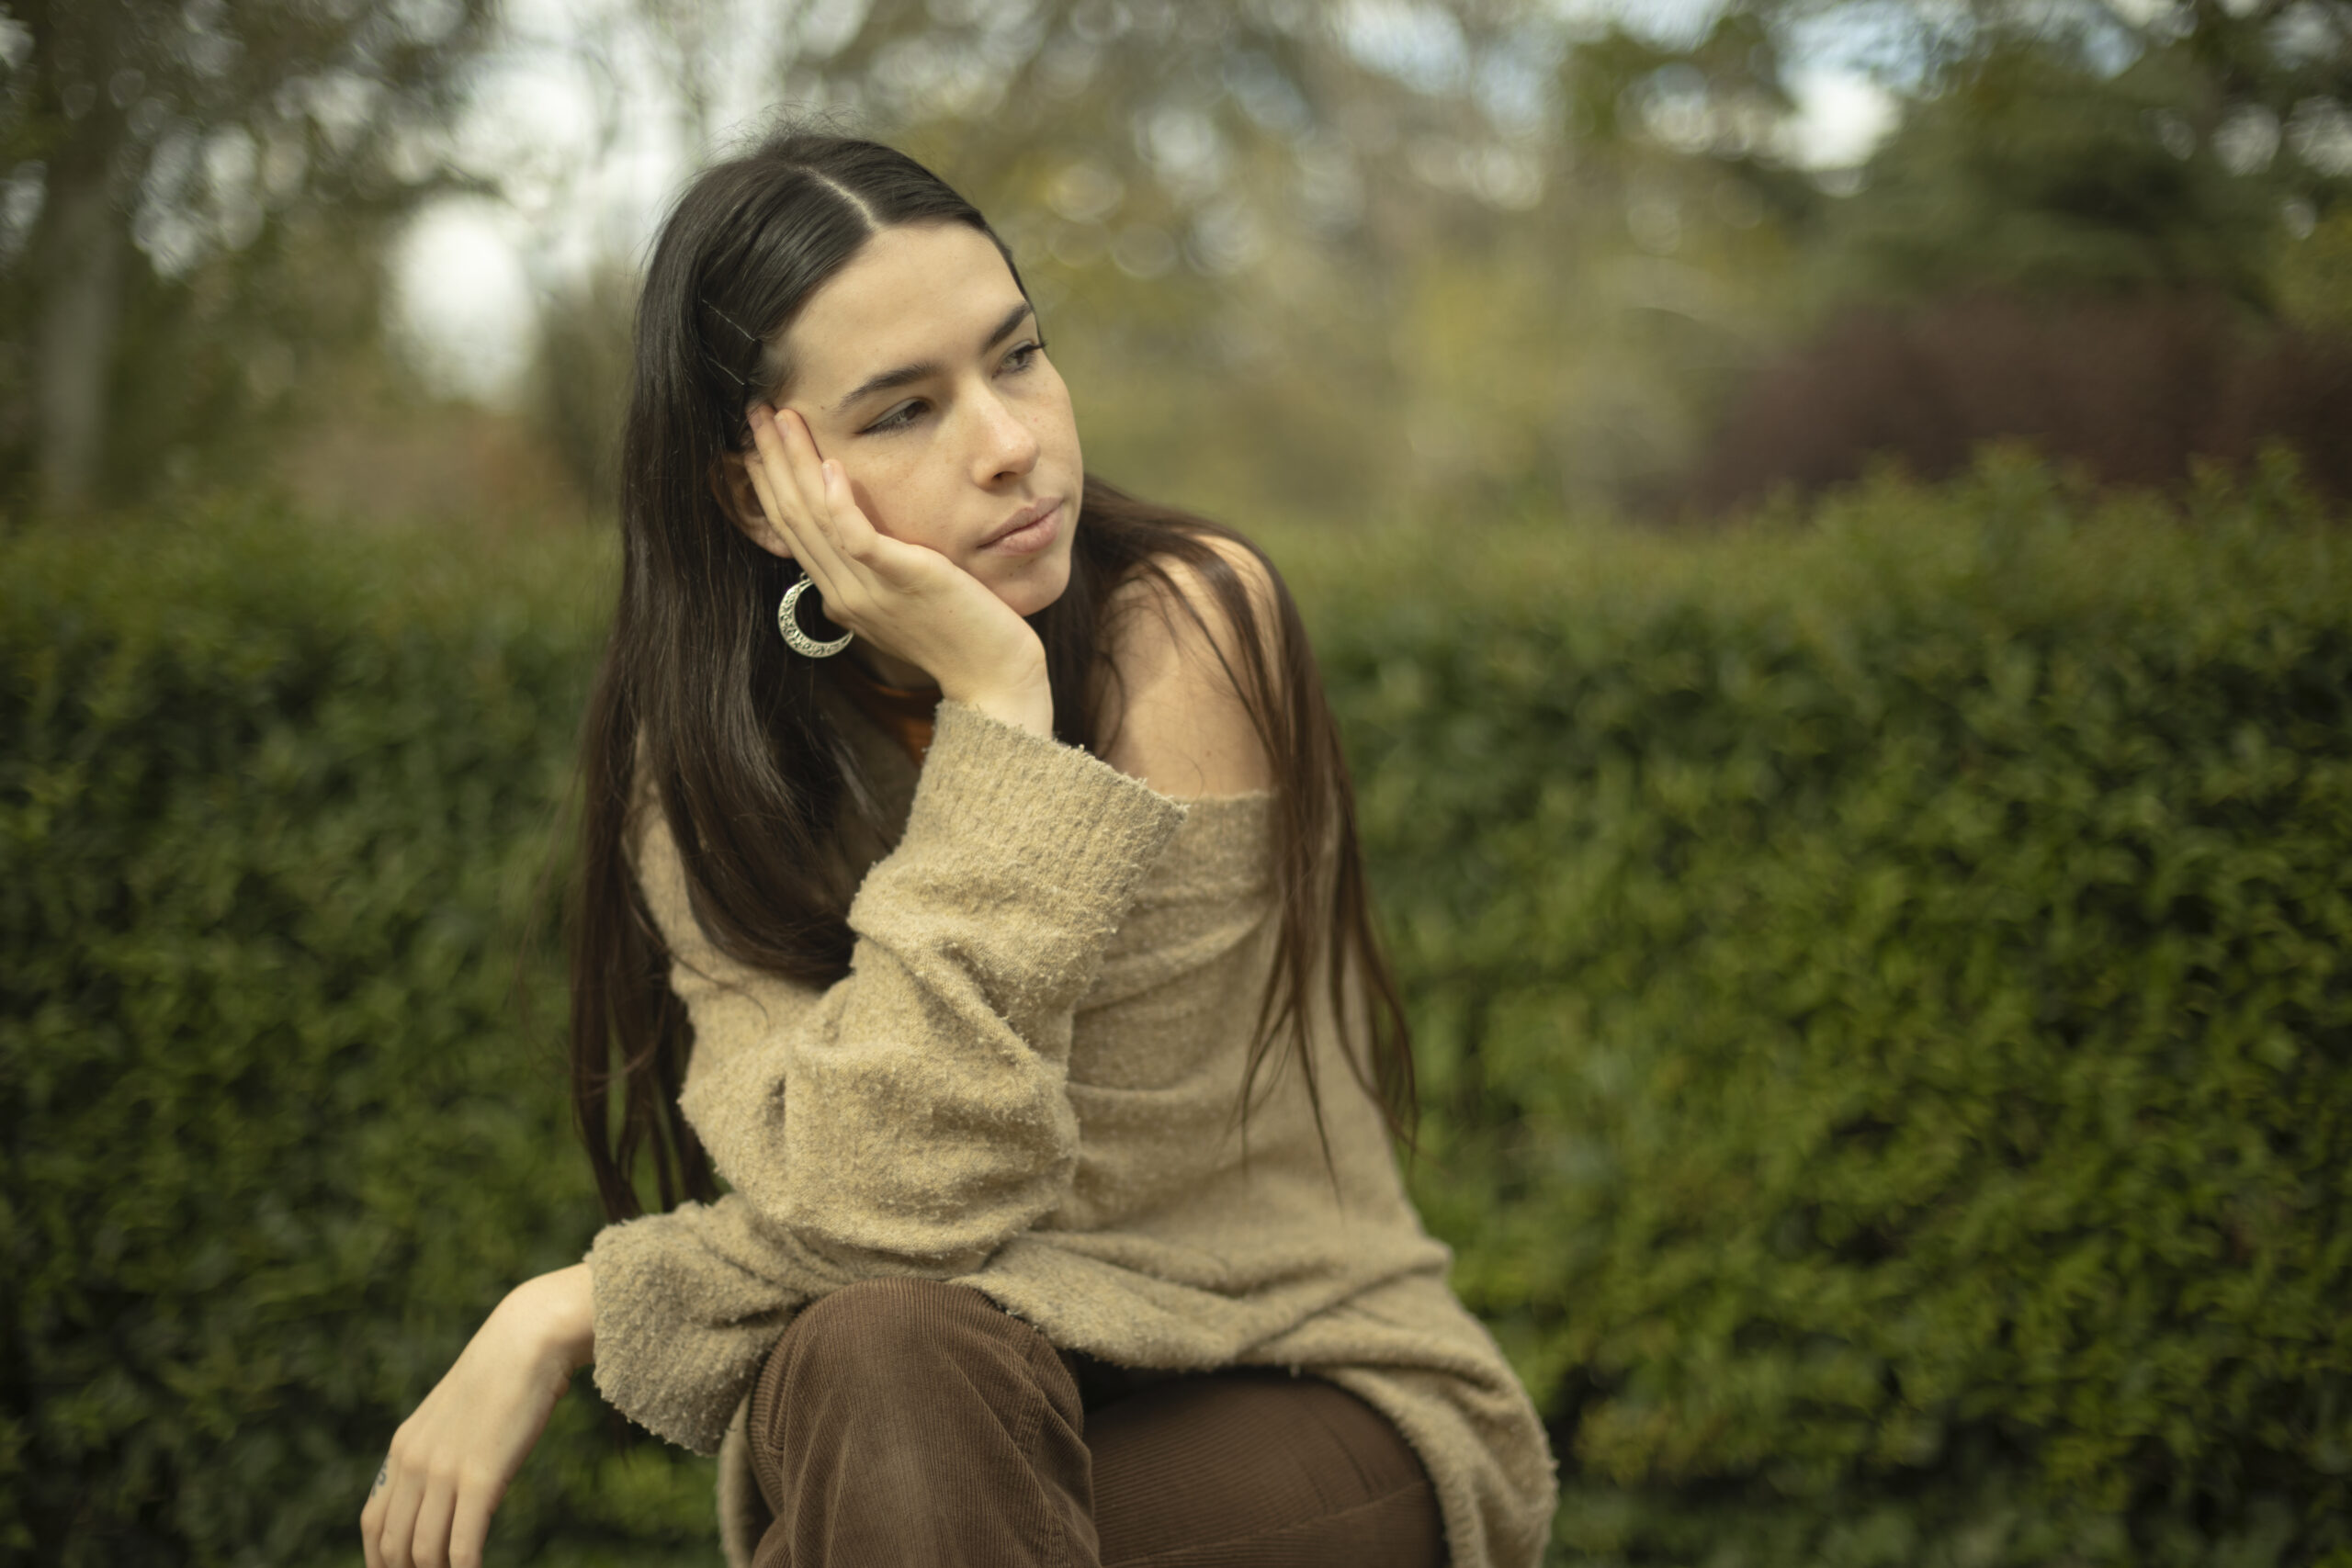 A young Caucasian woman sits outdoors, chin resting on hand against a blurred plant background, directing her gaze towards copy space. versatile visual with emphasis on nature and customizable content - Calming the mind